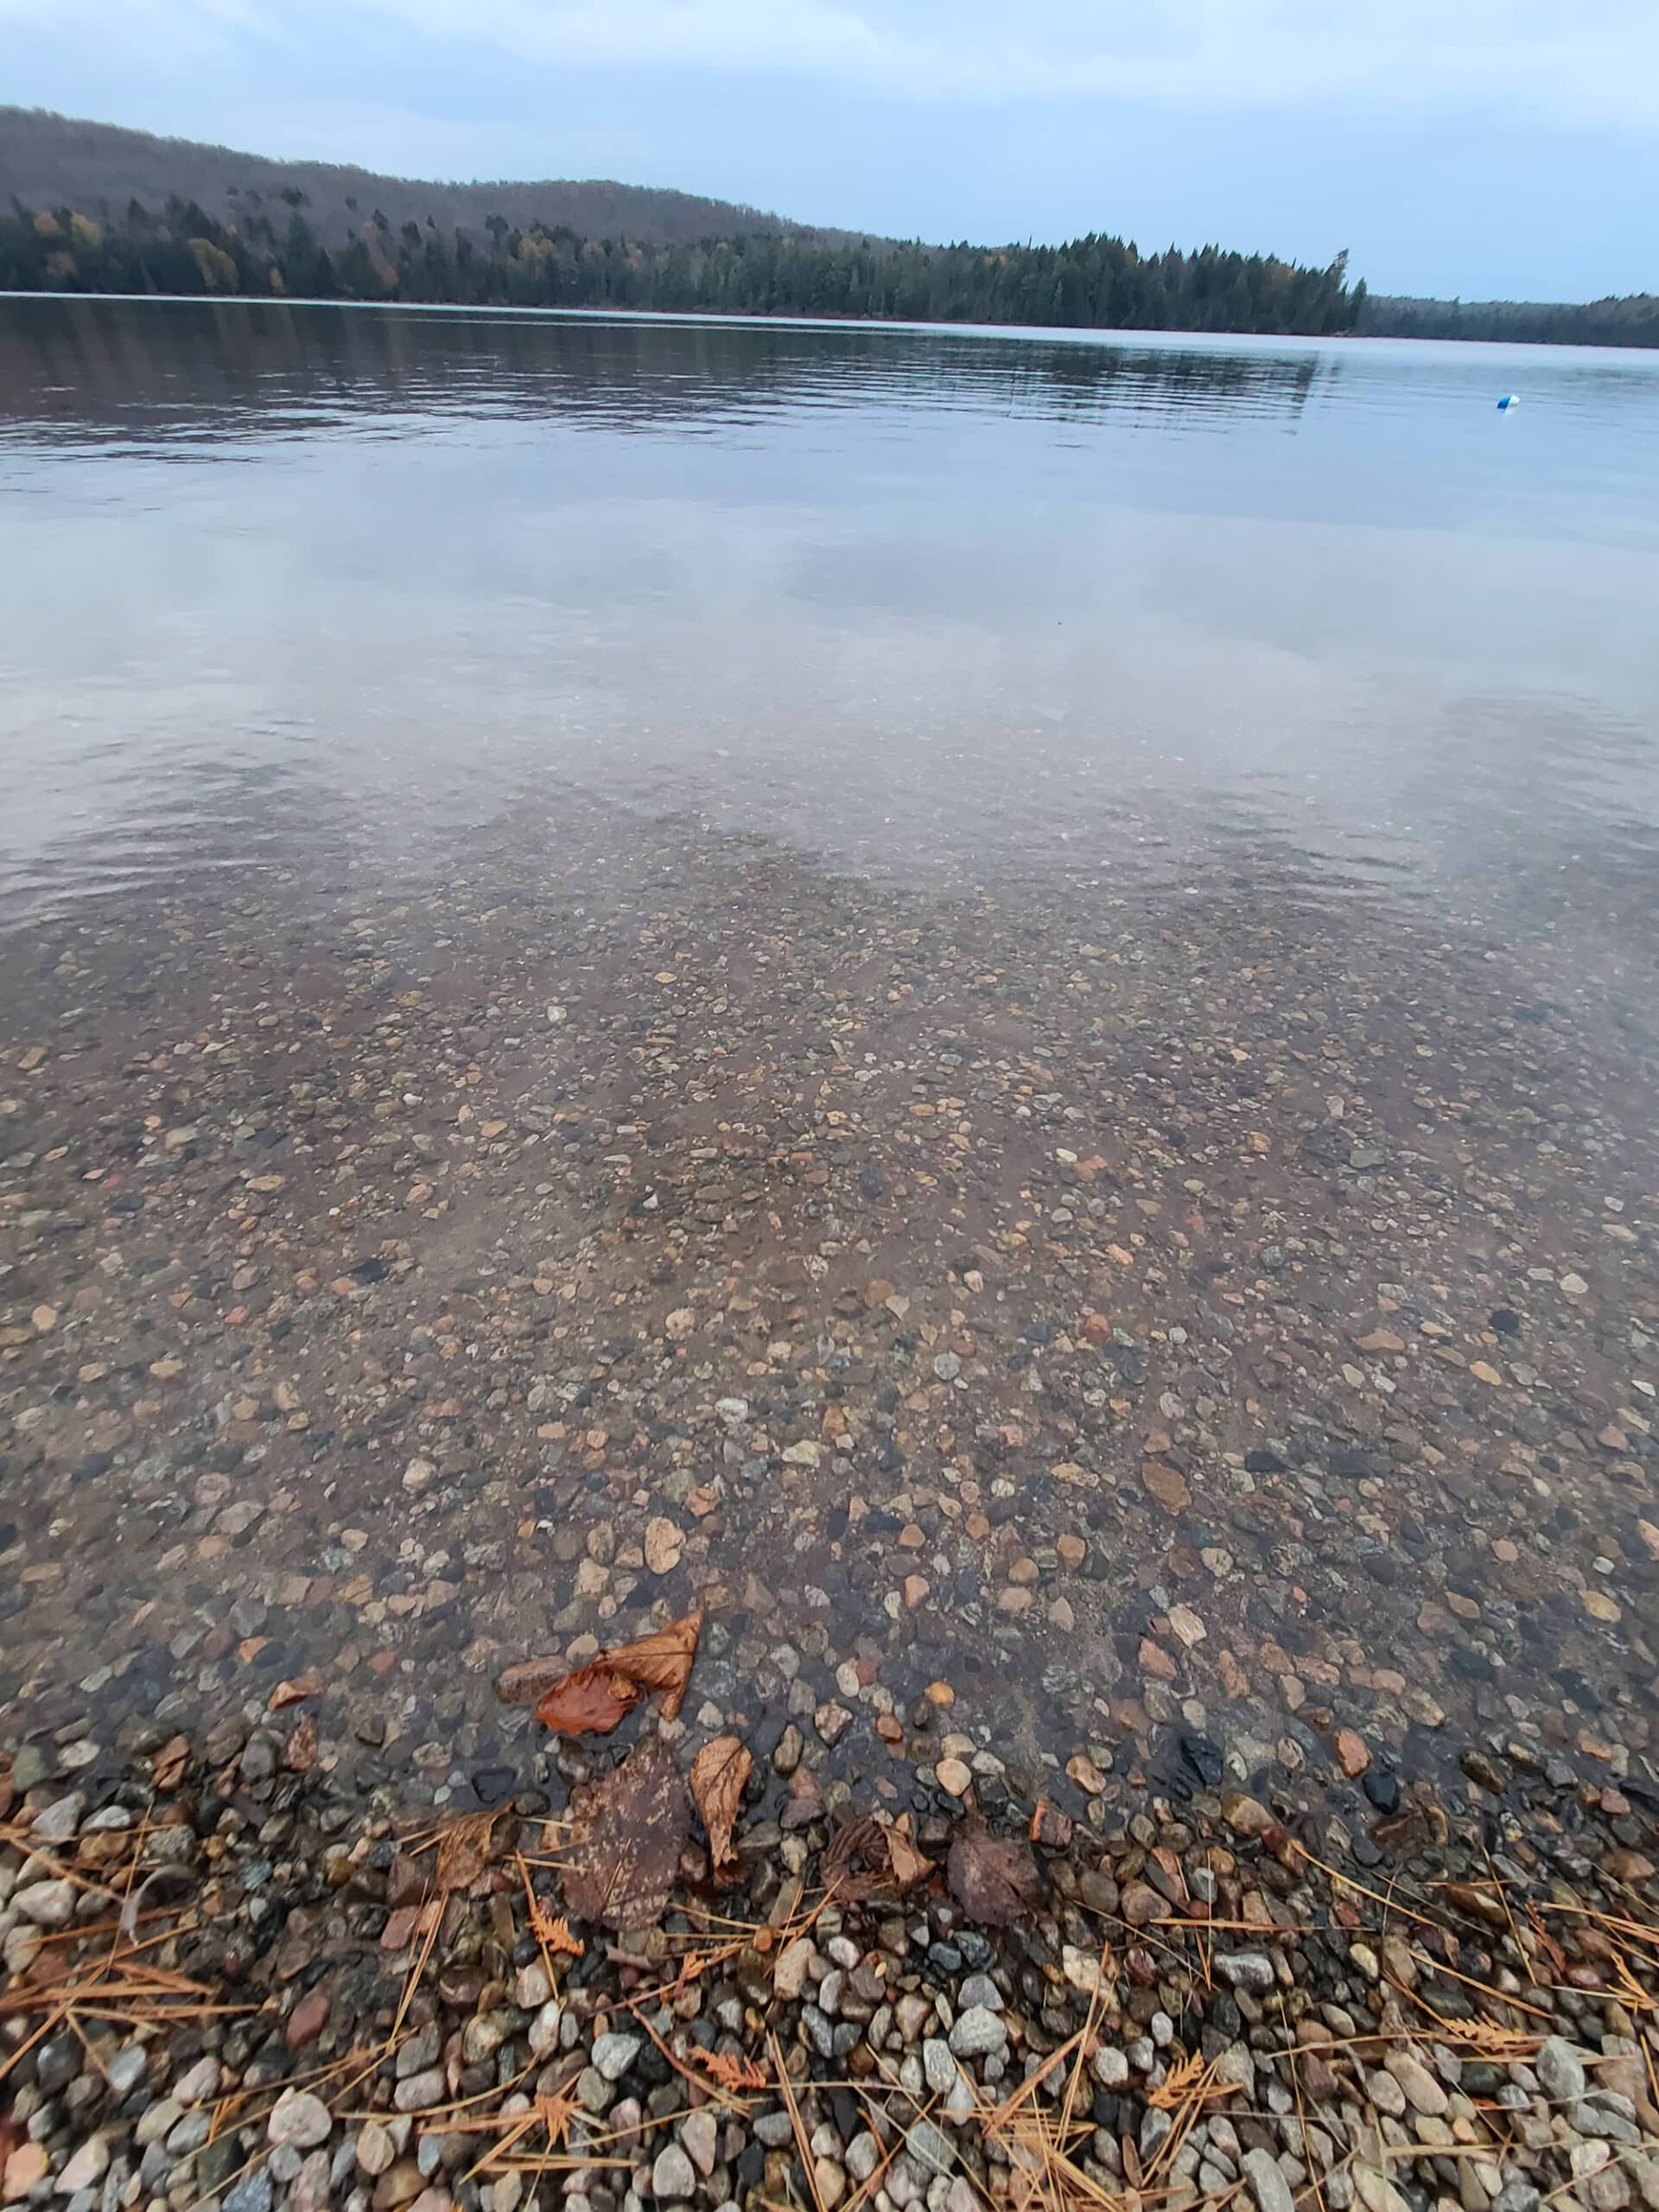 A close up view of the water at Canisbay lake, showing the rocky bottom.